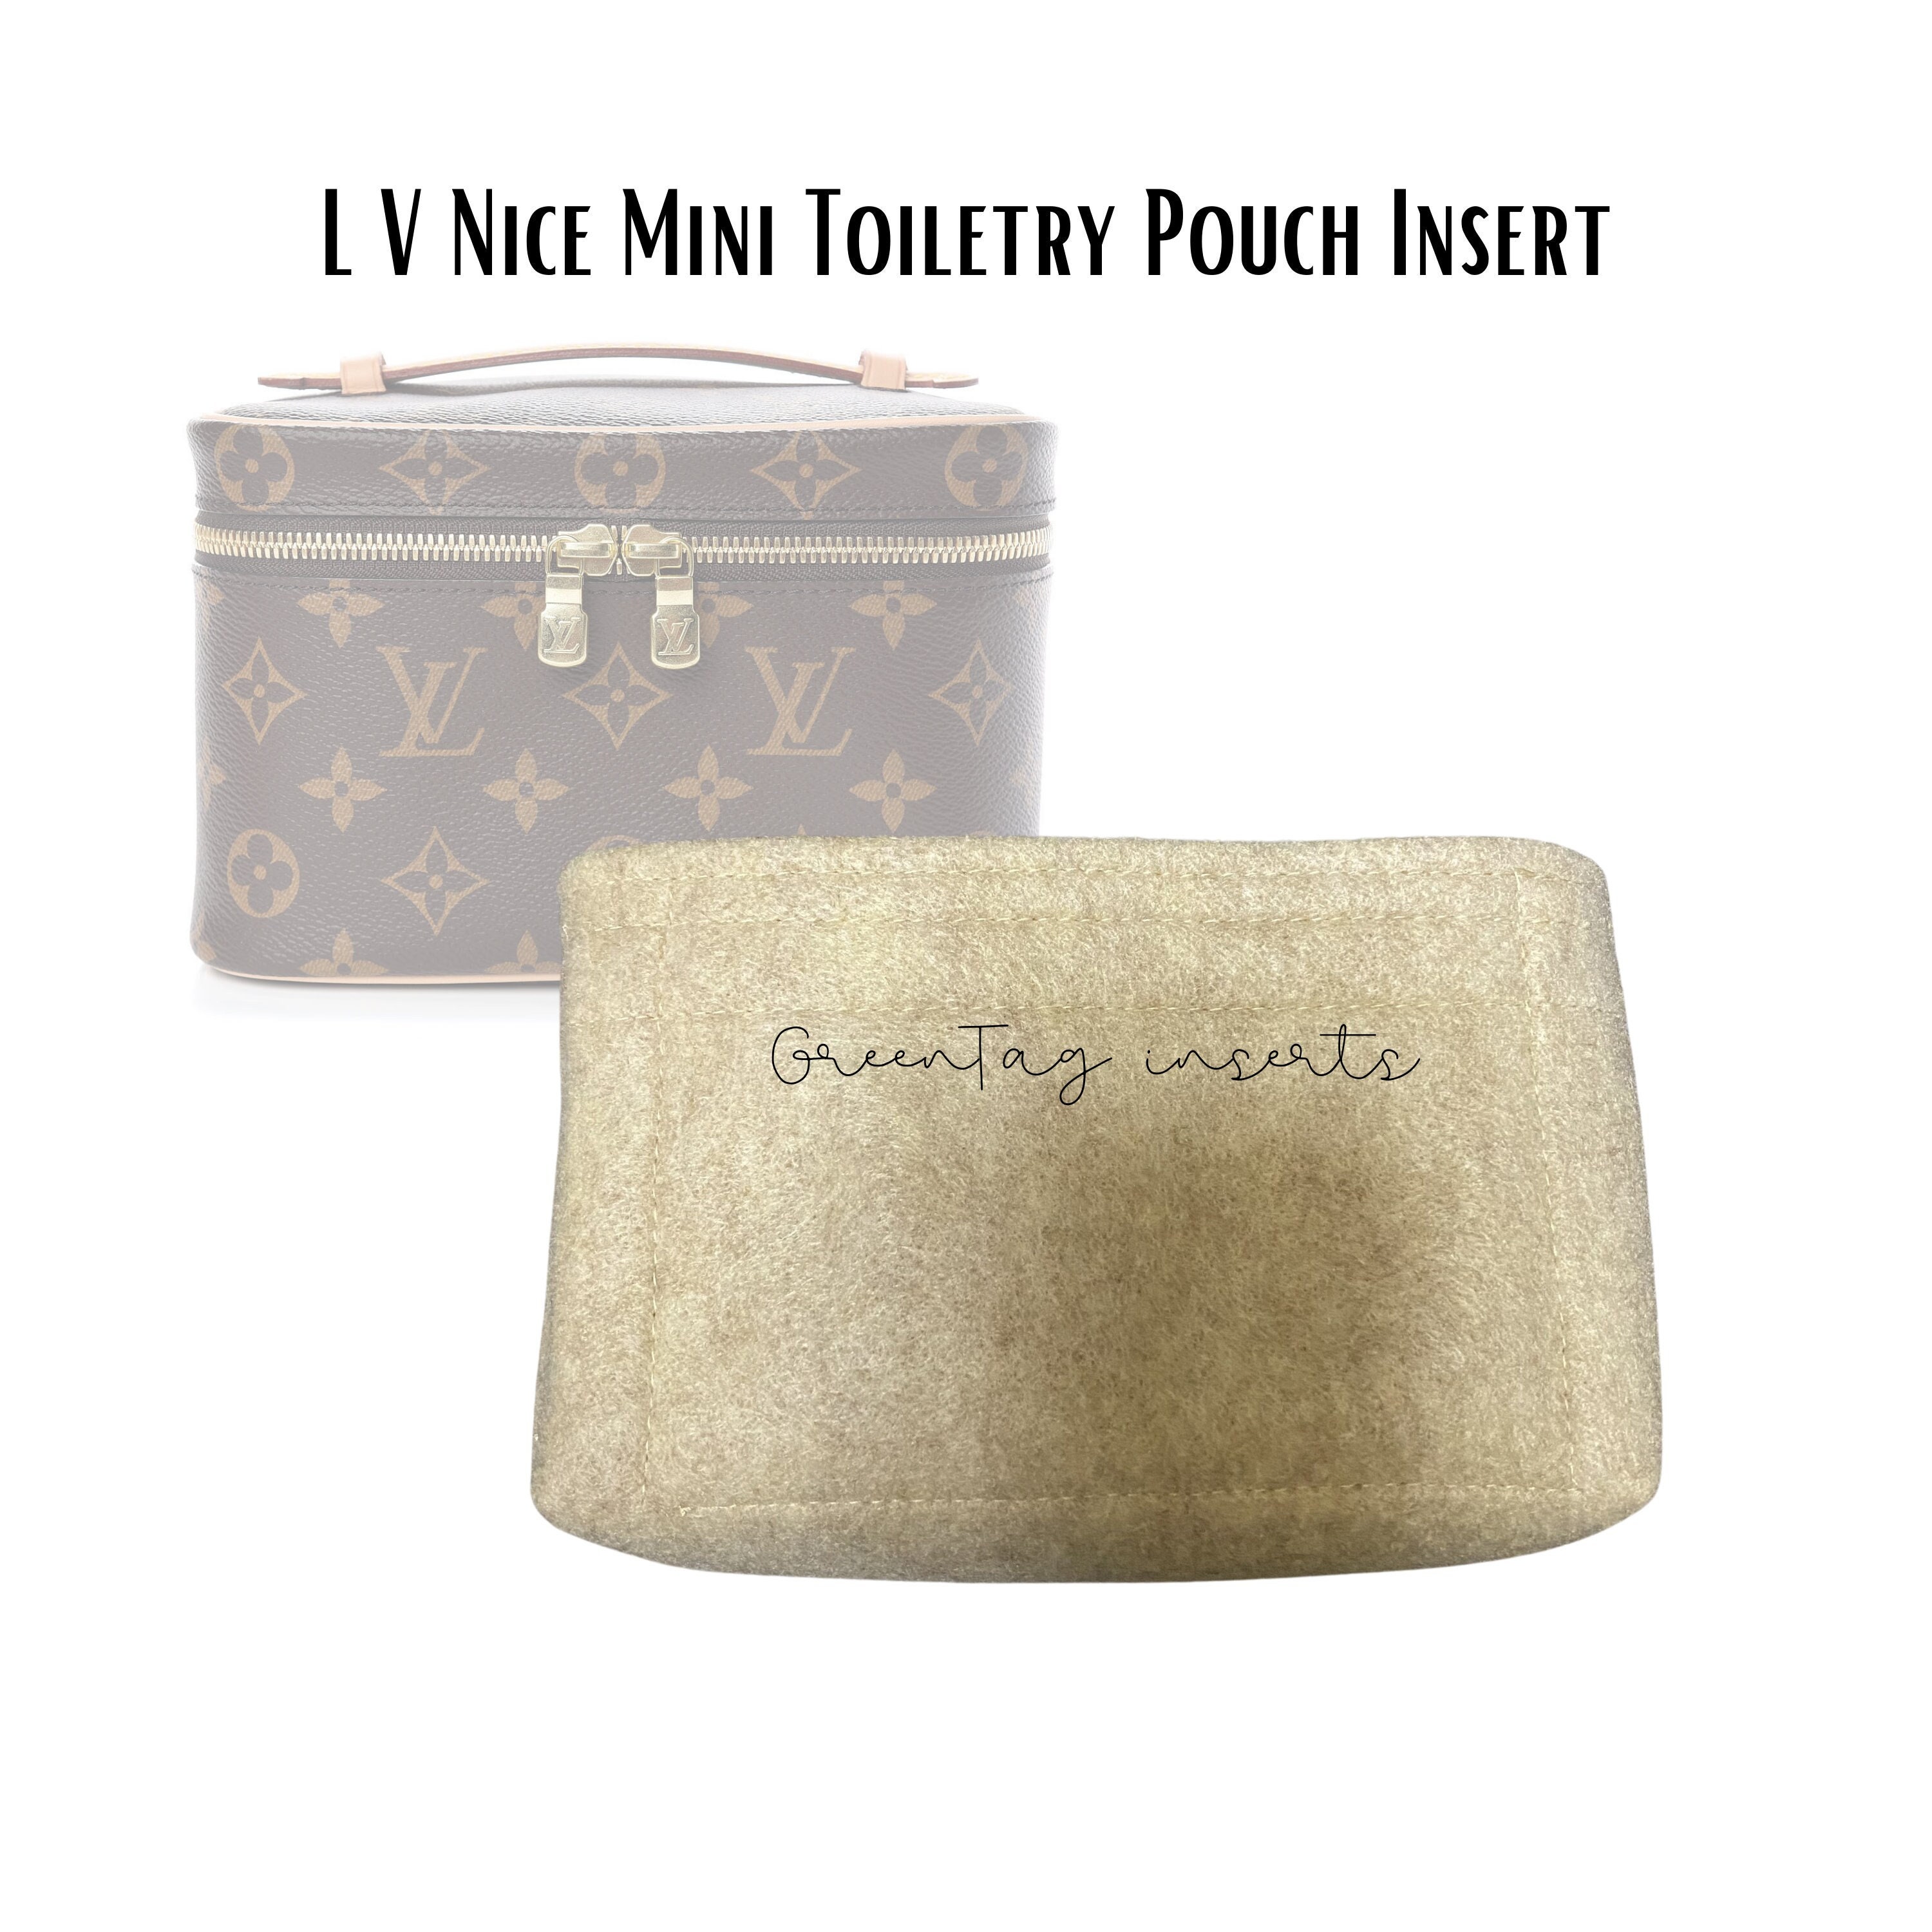 Buy NICE Nano NICE Mini Toiletry Pouch Conversion Kit Gold Chain Interwoven  With Leather 2 Sets of D-rings Nice Vanity Case Look Online in India 